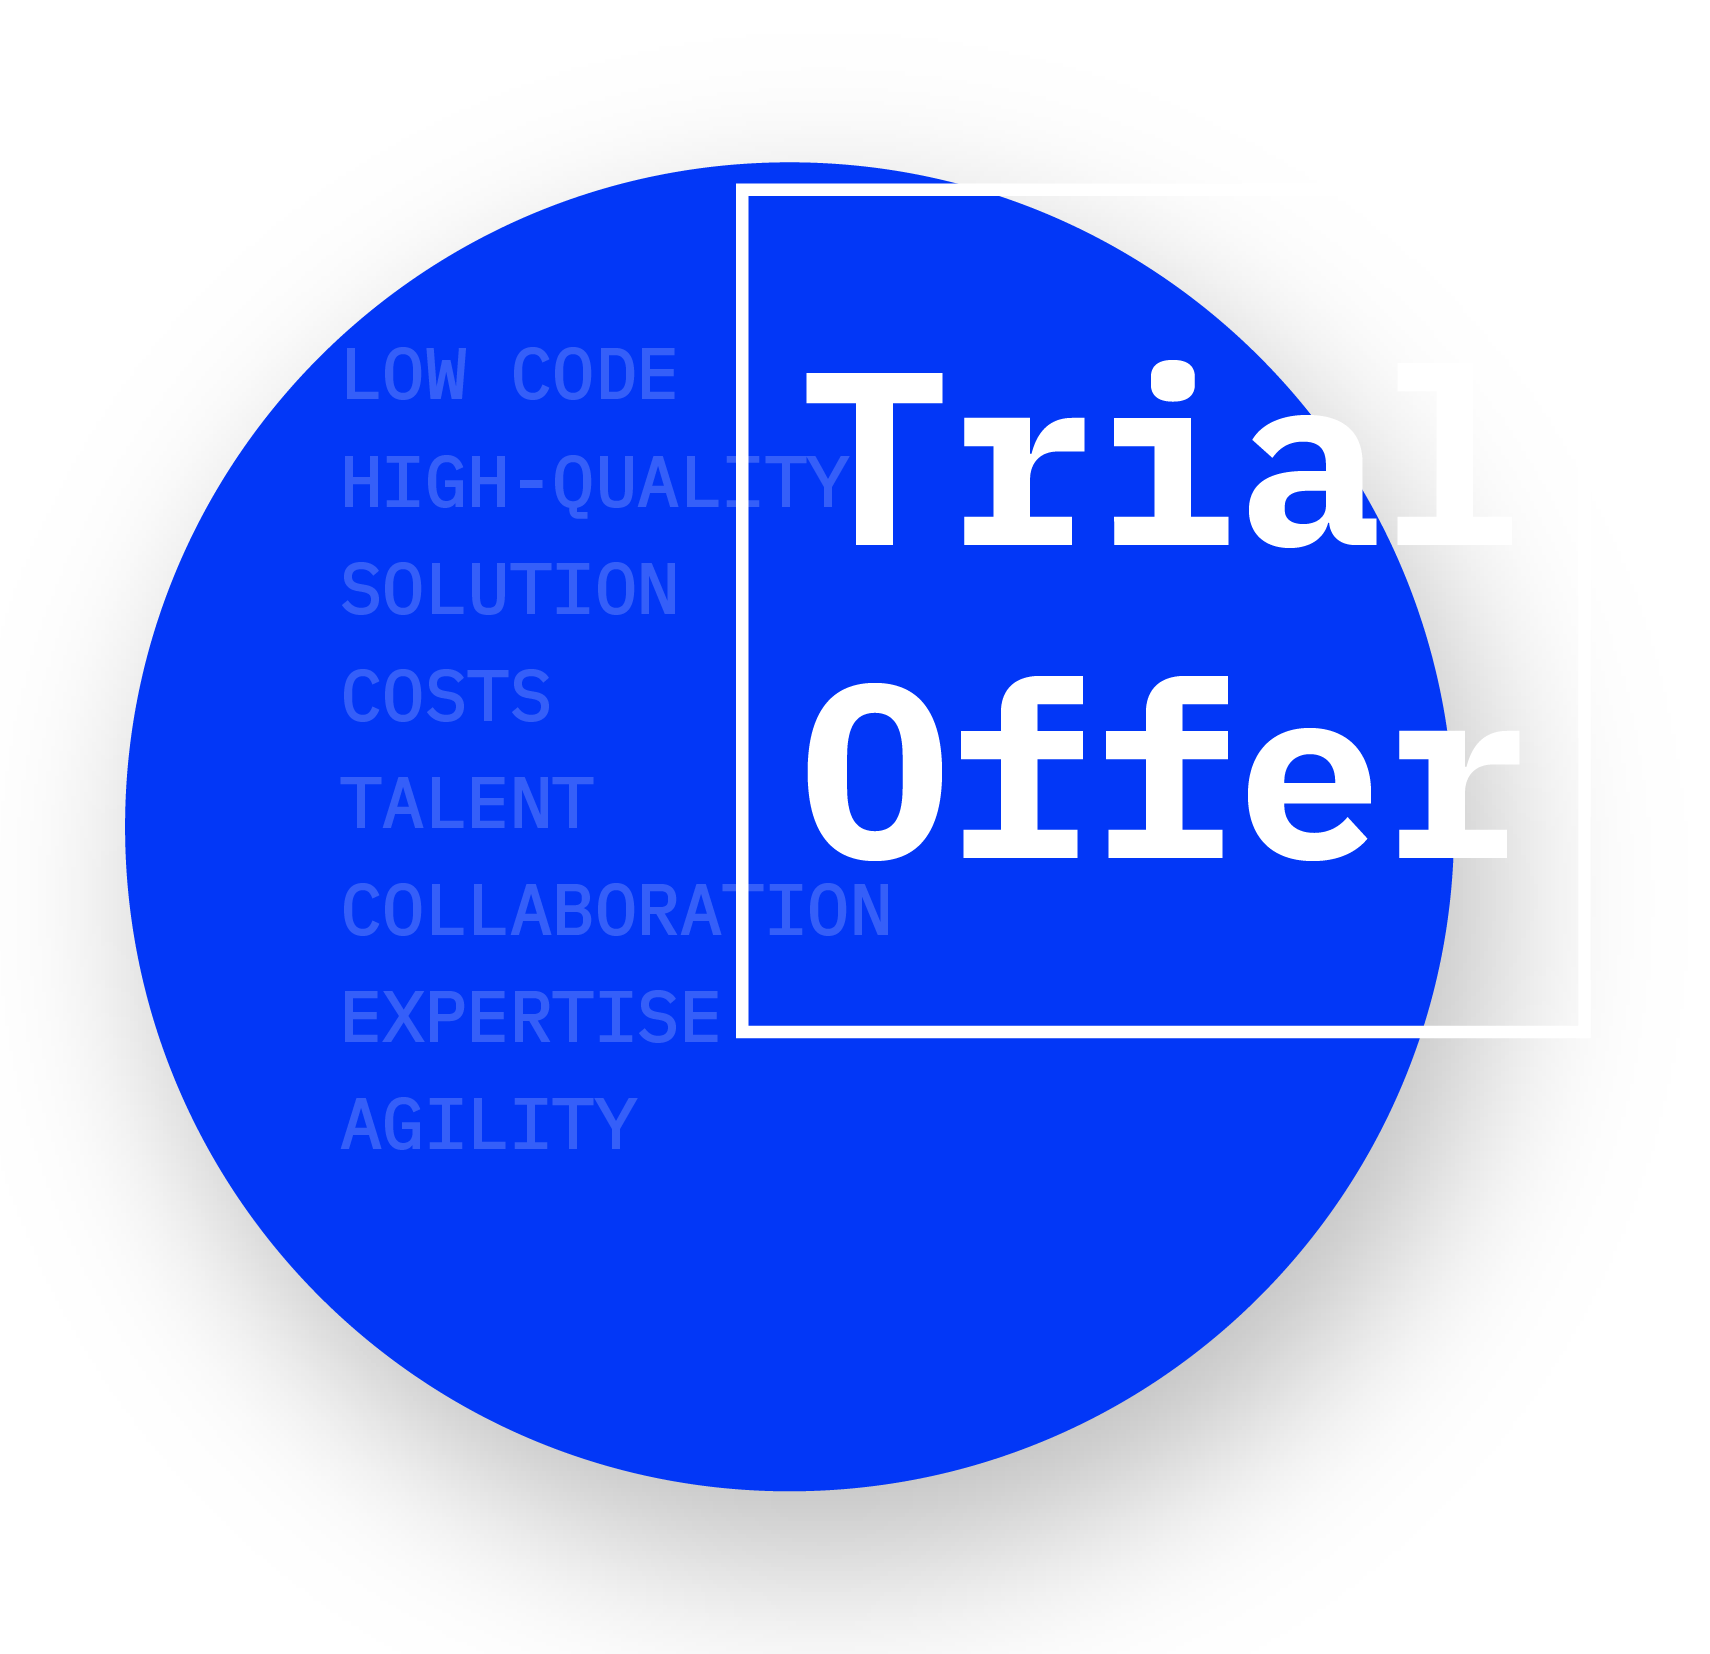 Trial offer